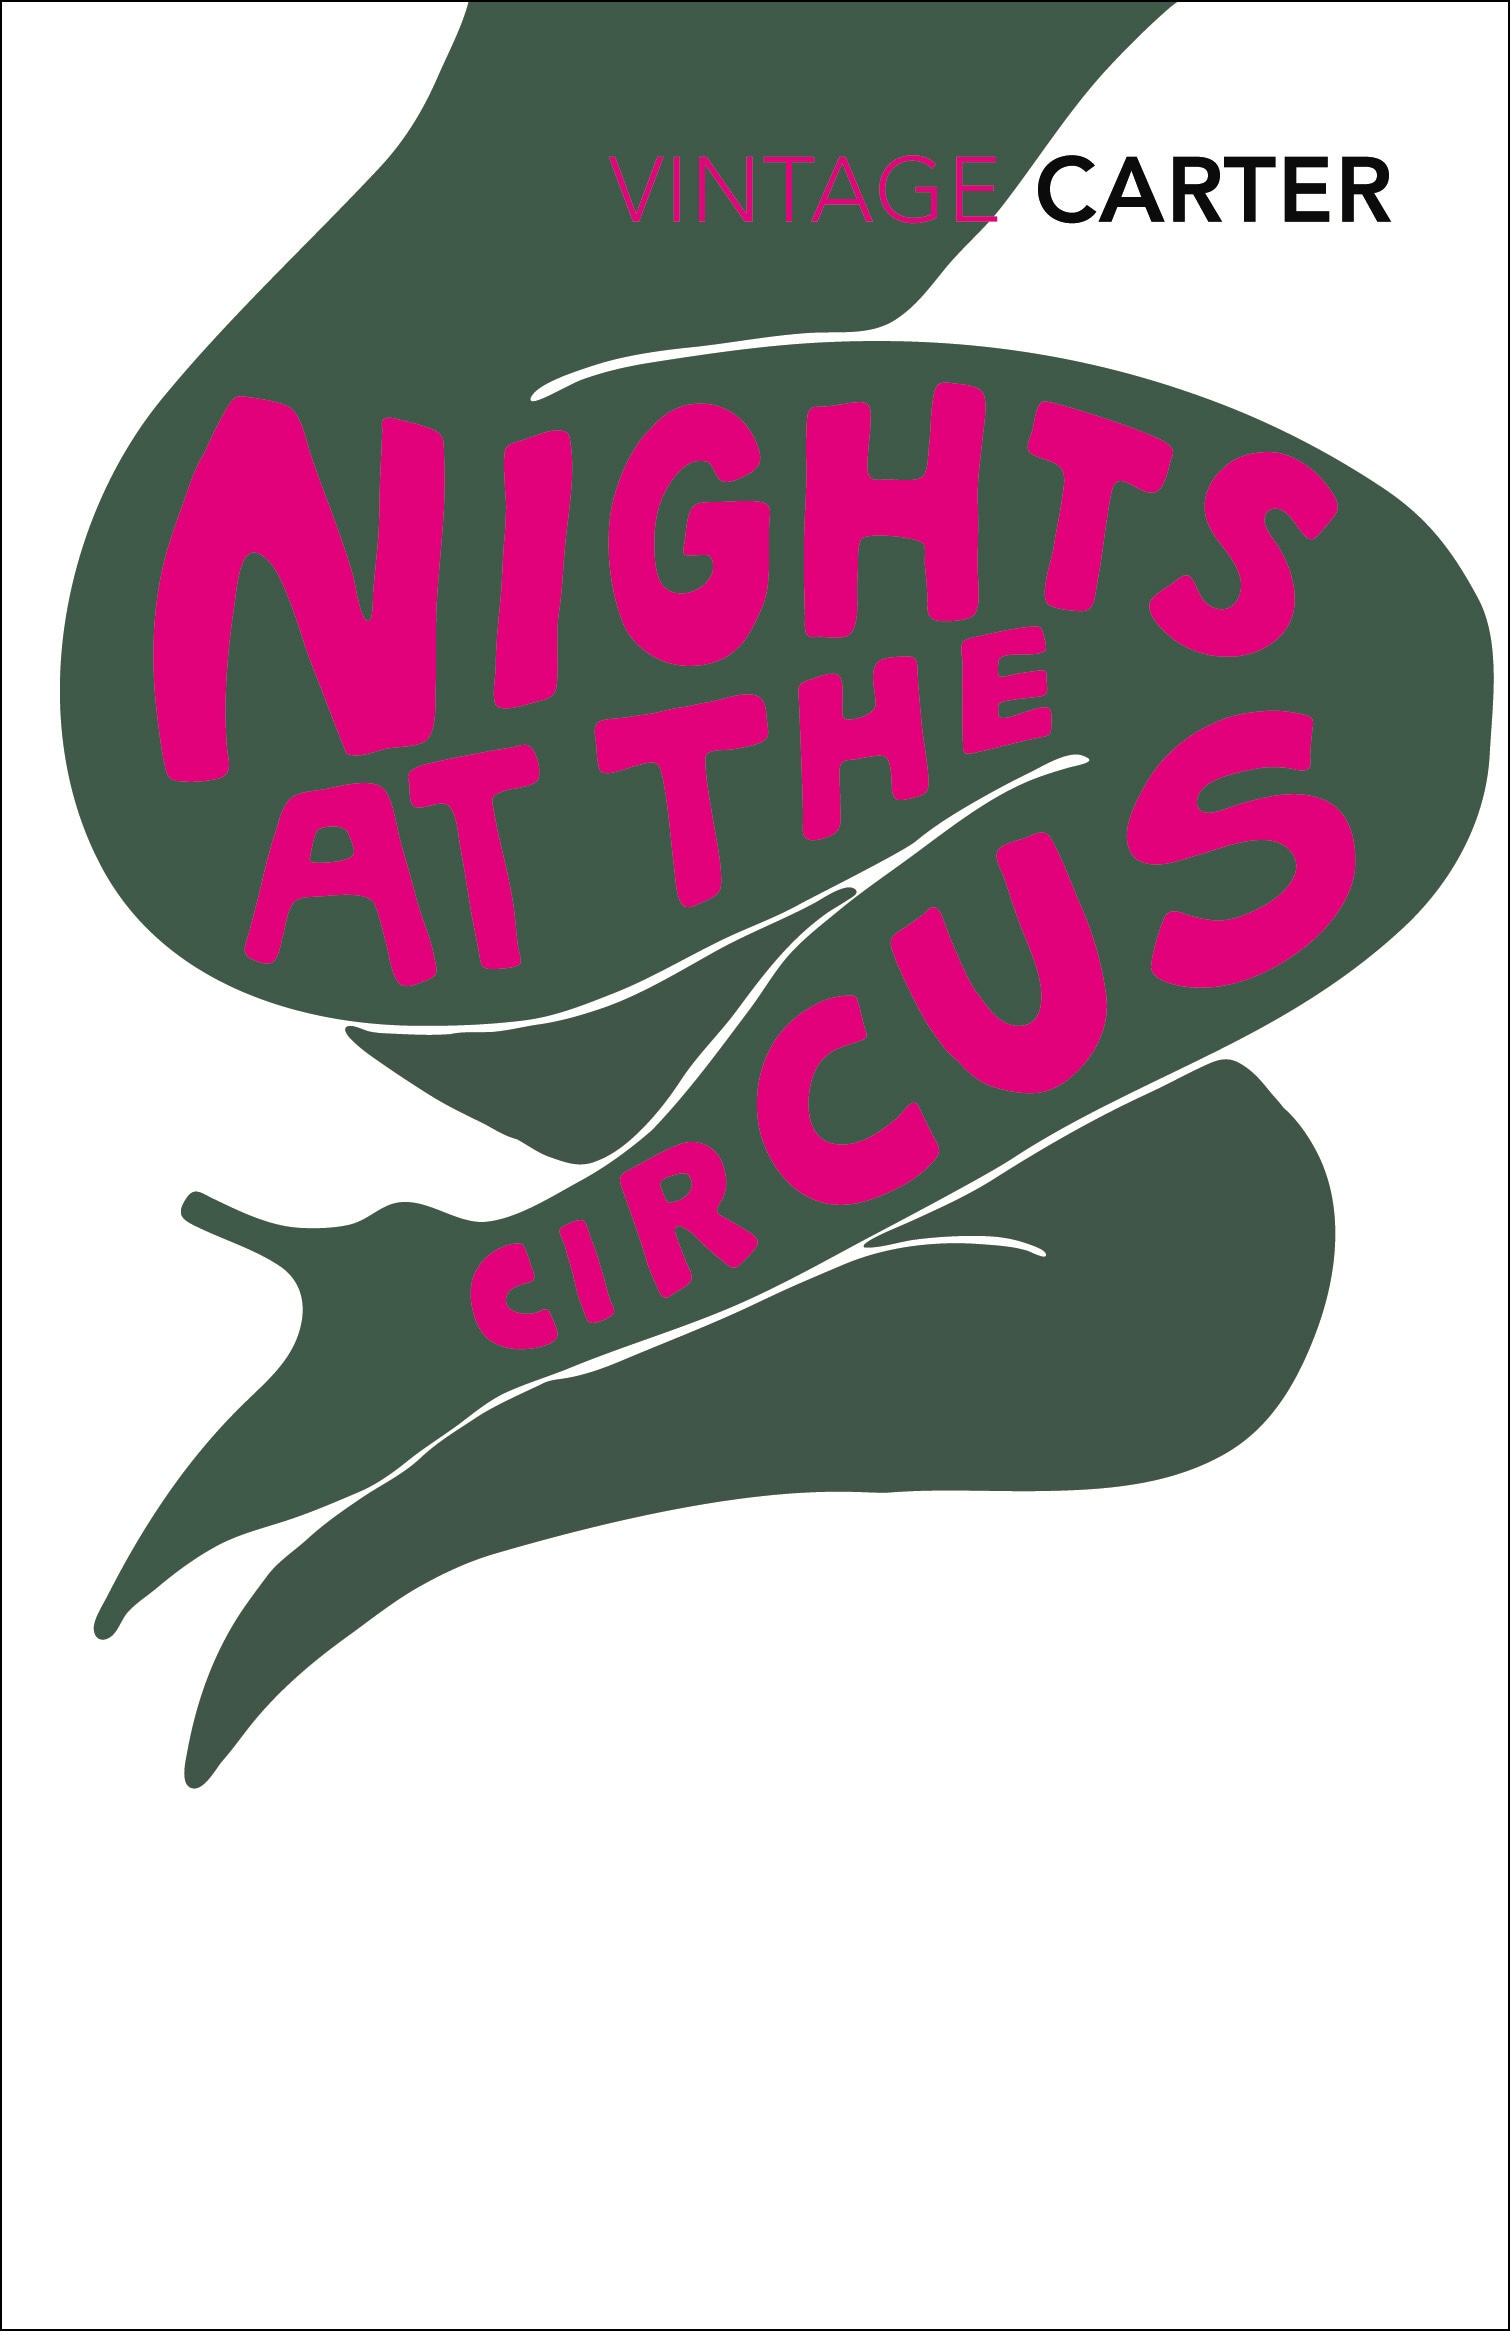 Book “Nights at the Circus” by Angela Carter — September 29, 1994